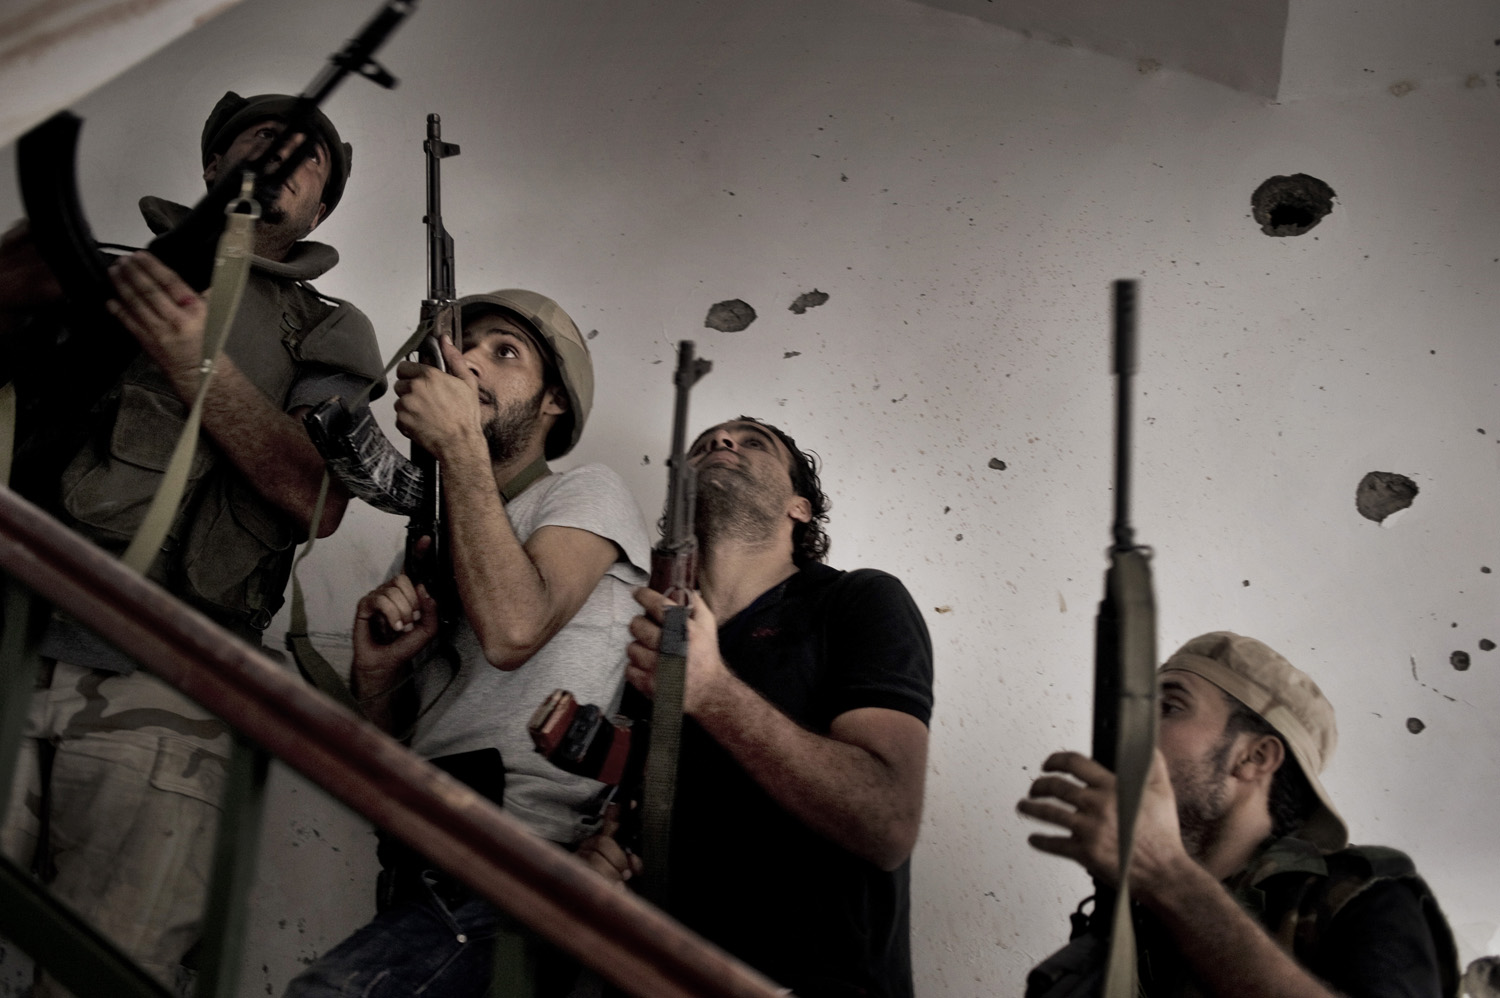 Rebel fighters clear the stairwell of a building in the Abu Slim neighborhood of Tripoli, August 25, 2011.